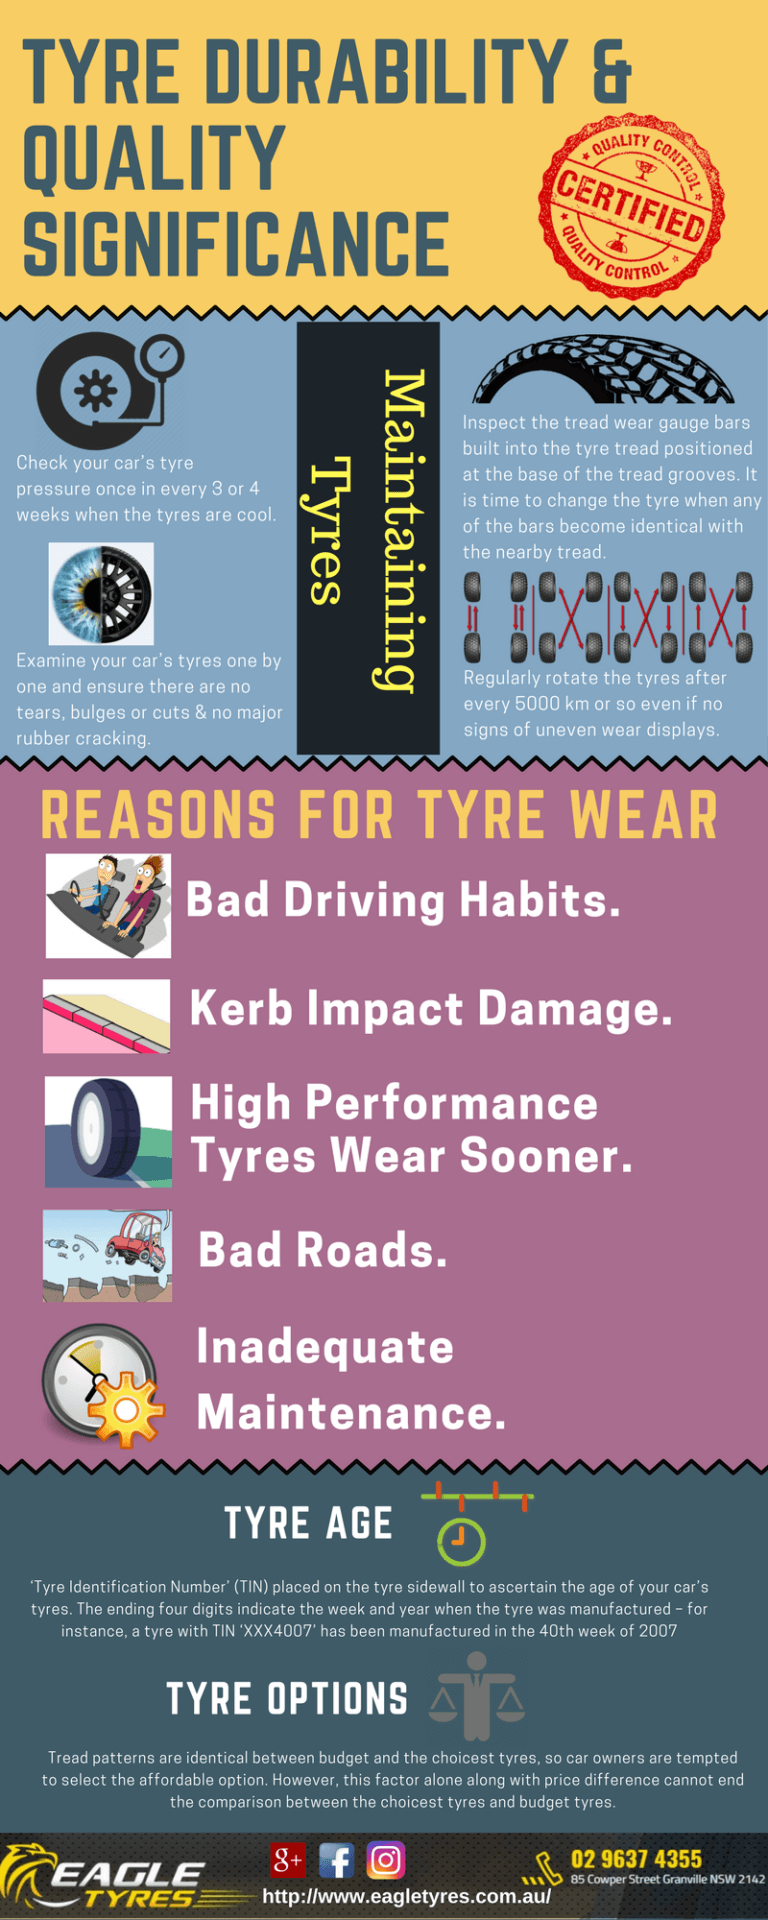 Tyre Quality And Durability